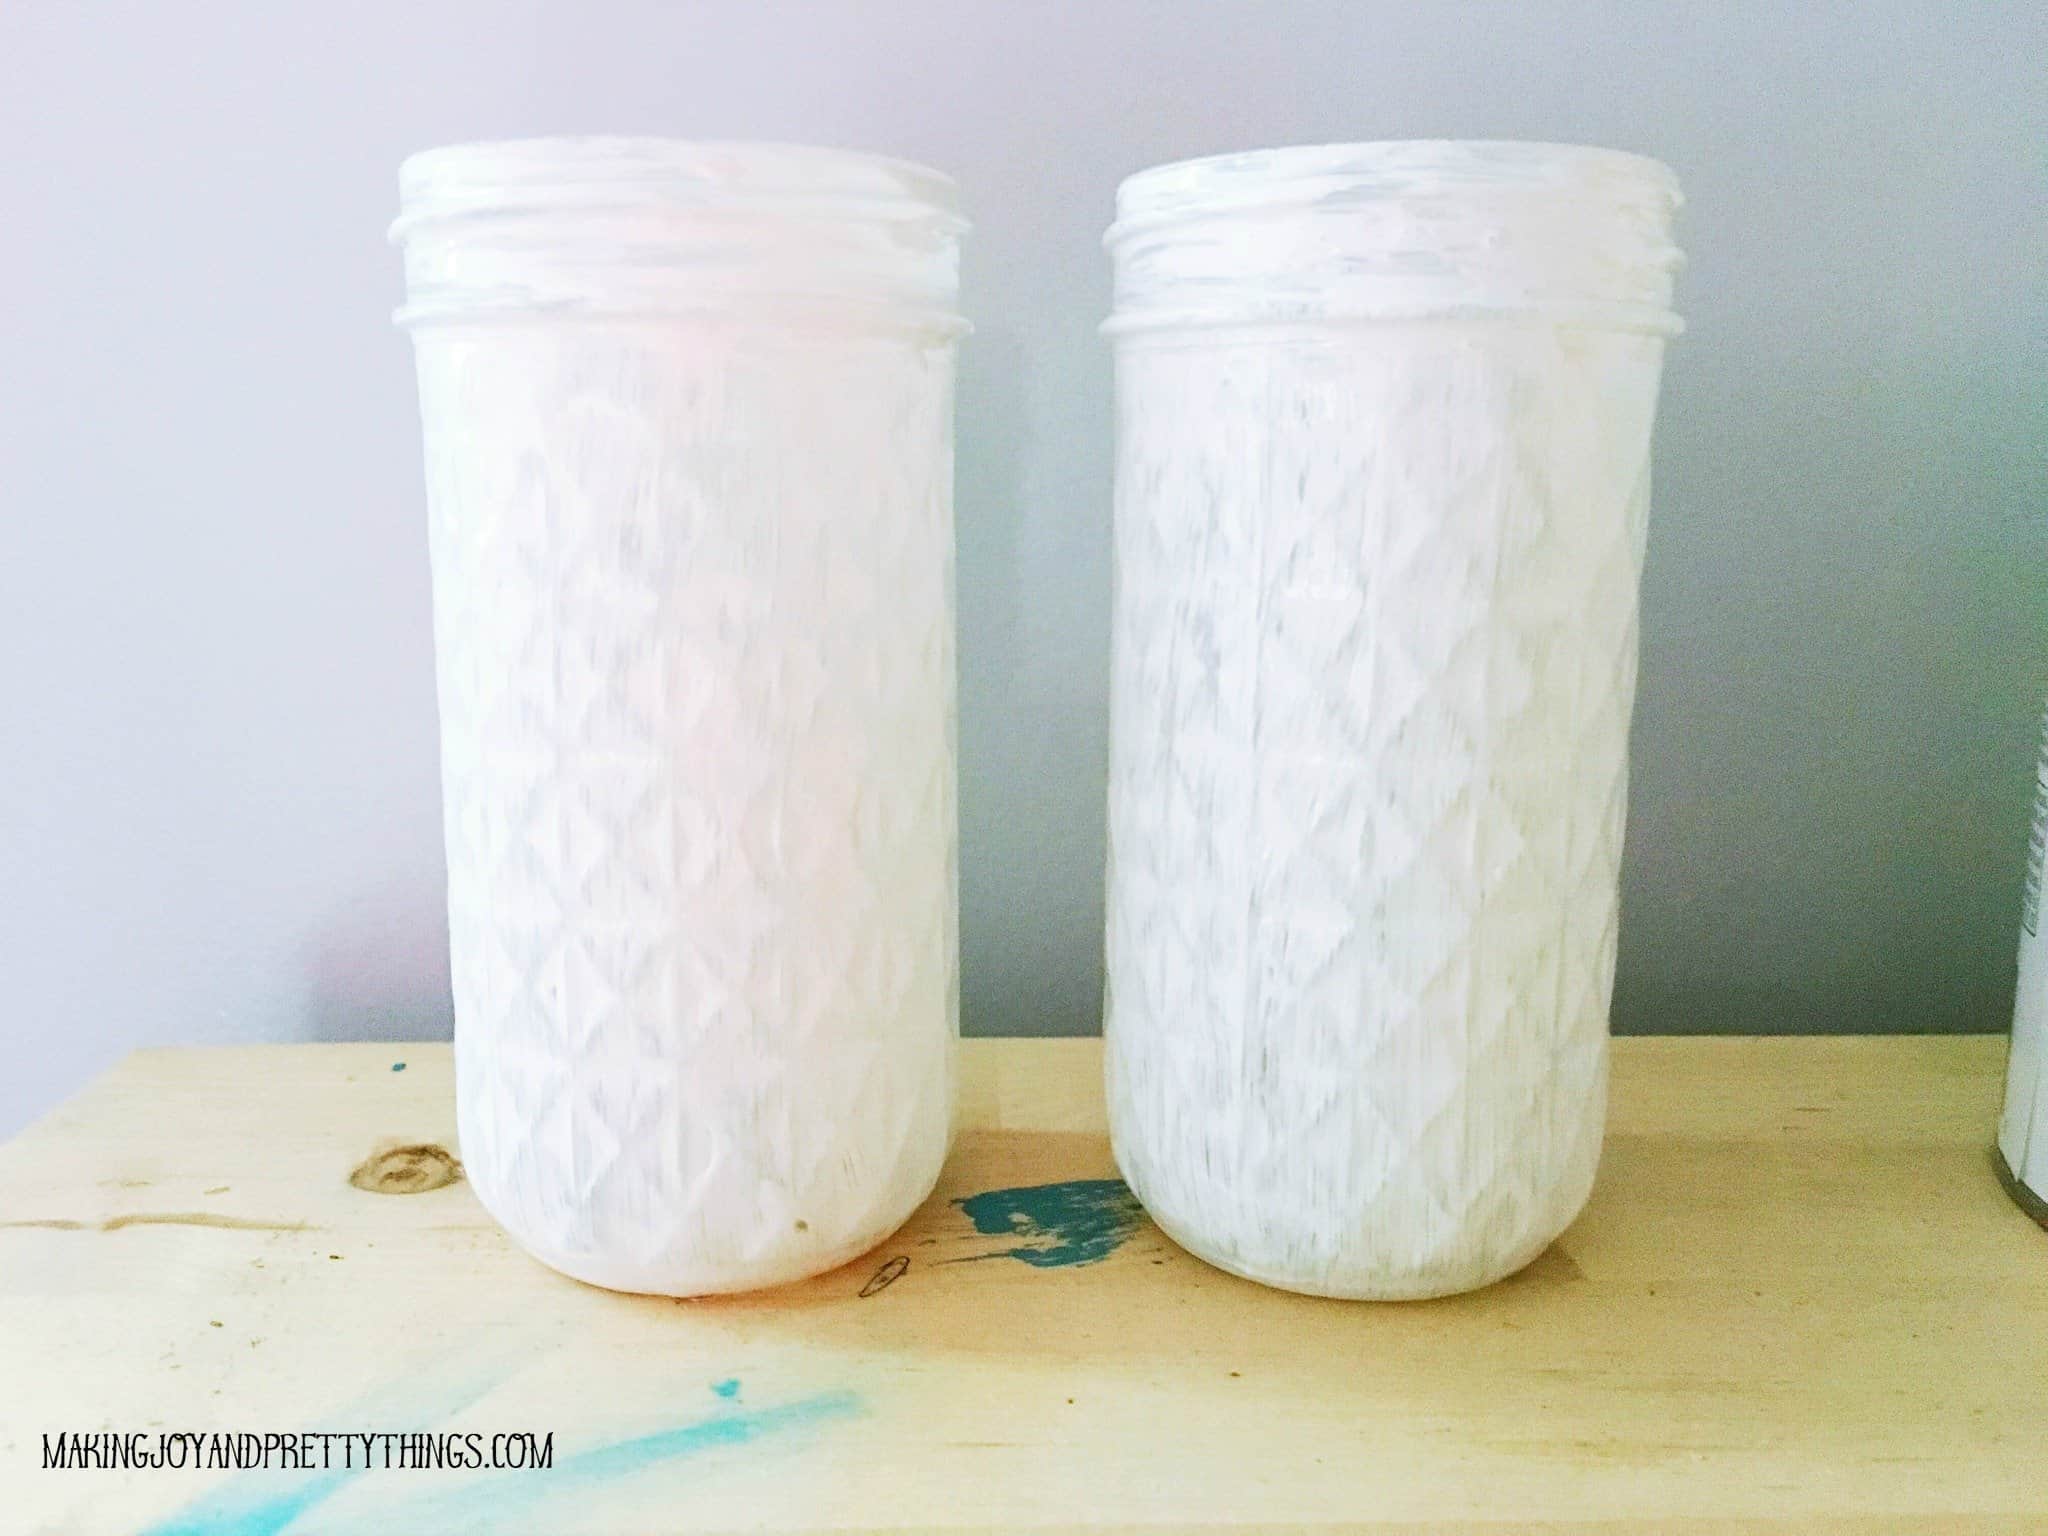 Two white jelly jars ready to be distressed that will have a thank you for helping me grow printable attached